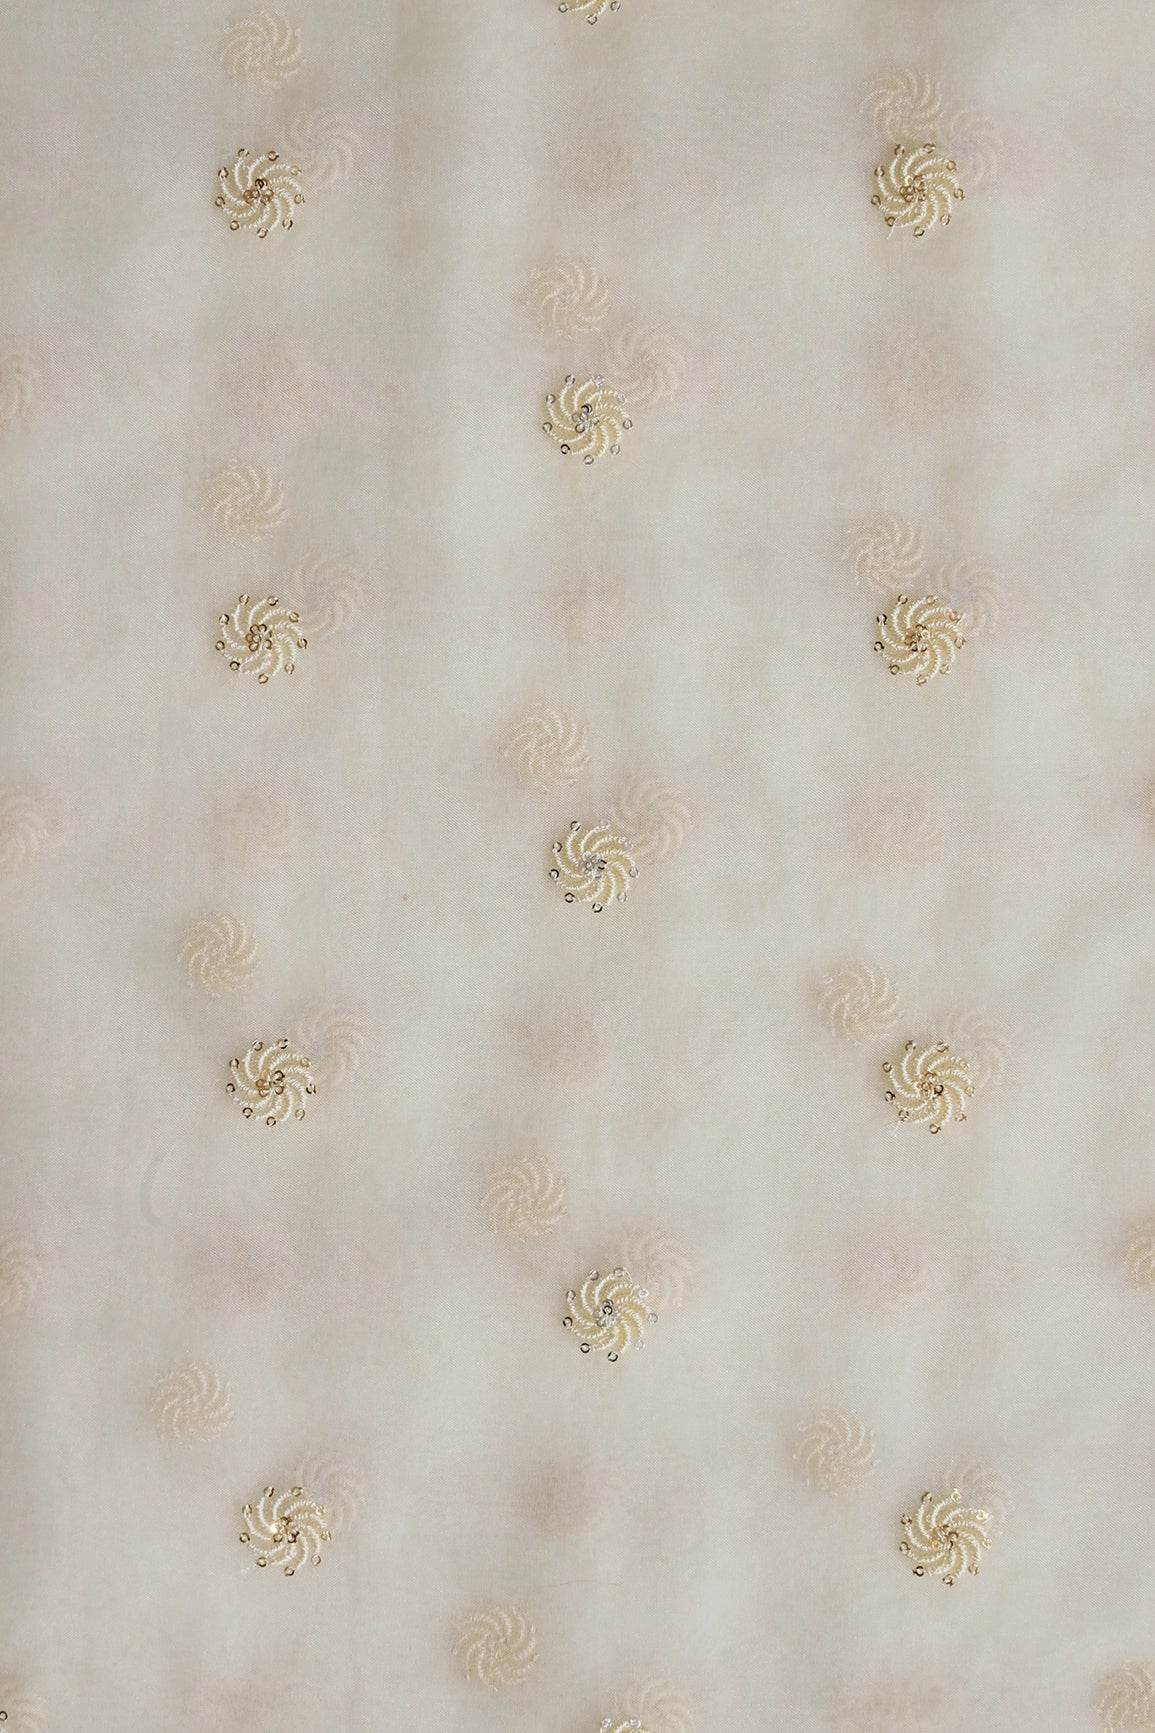 Gold And Silver Sequins Beautiful Small Motif Embroidery Work On Cream Organza Fabric